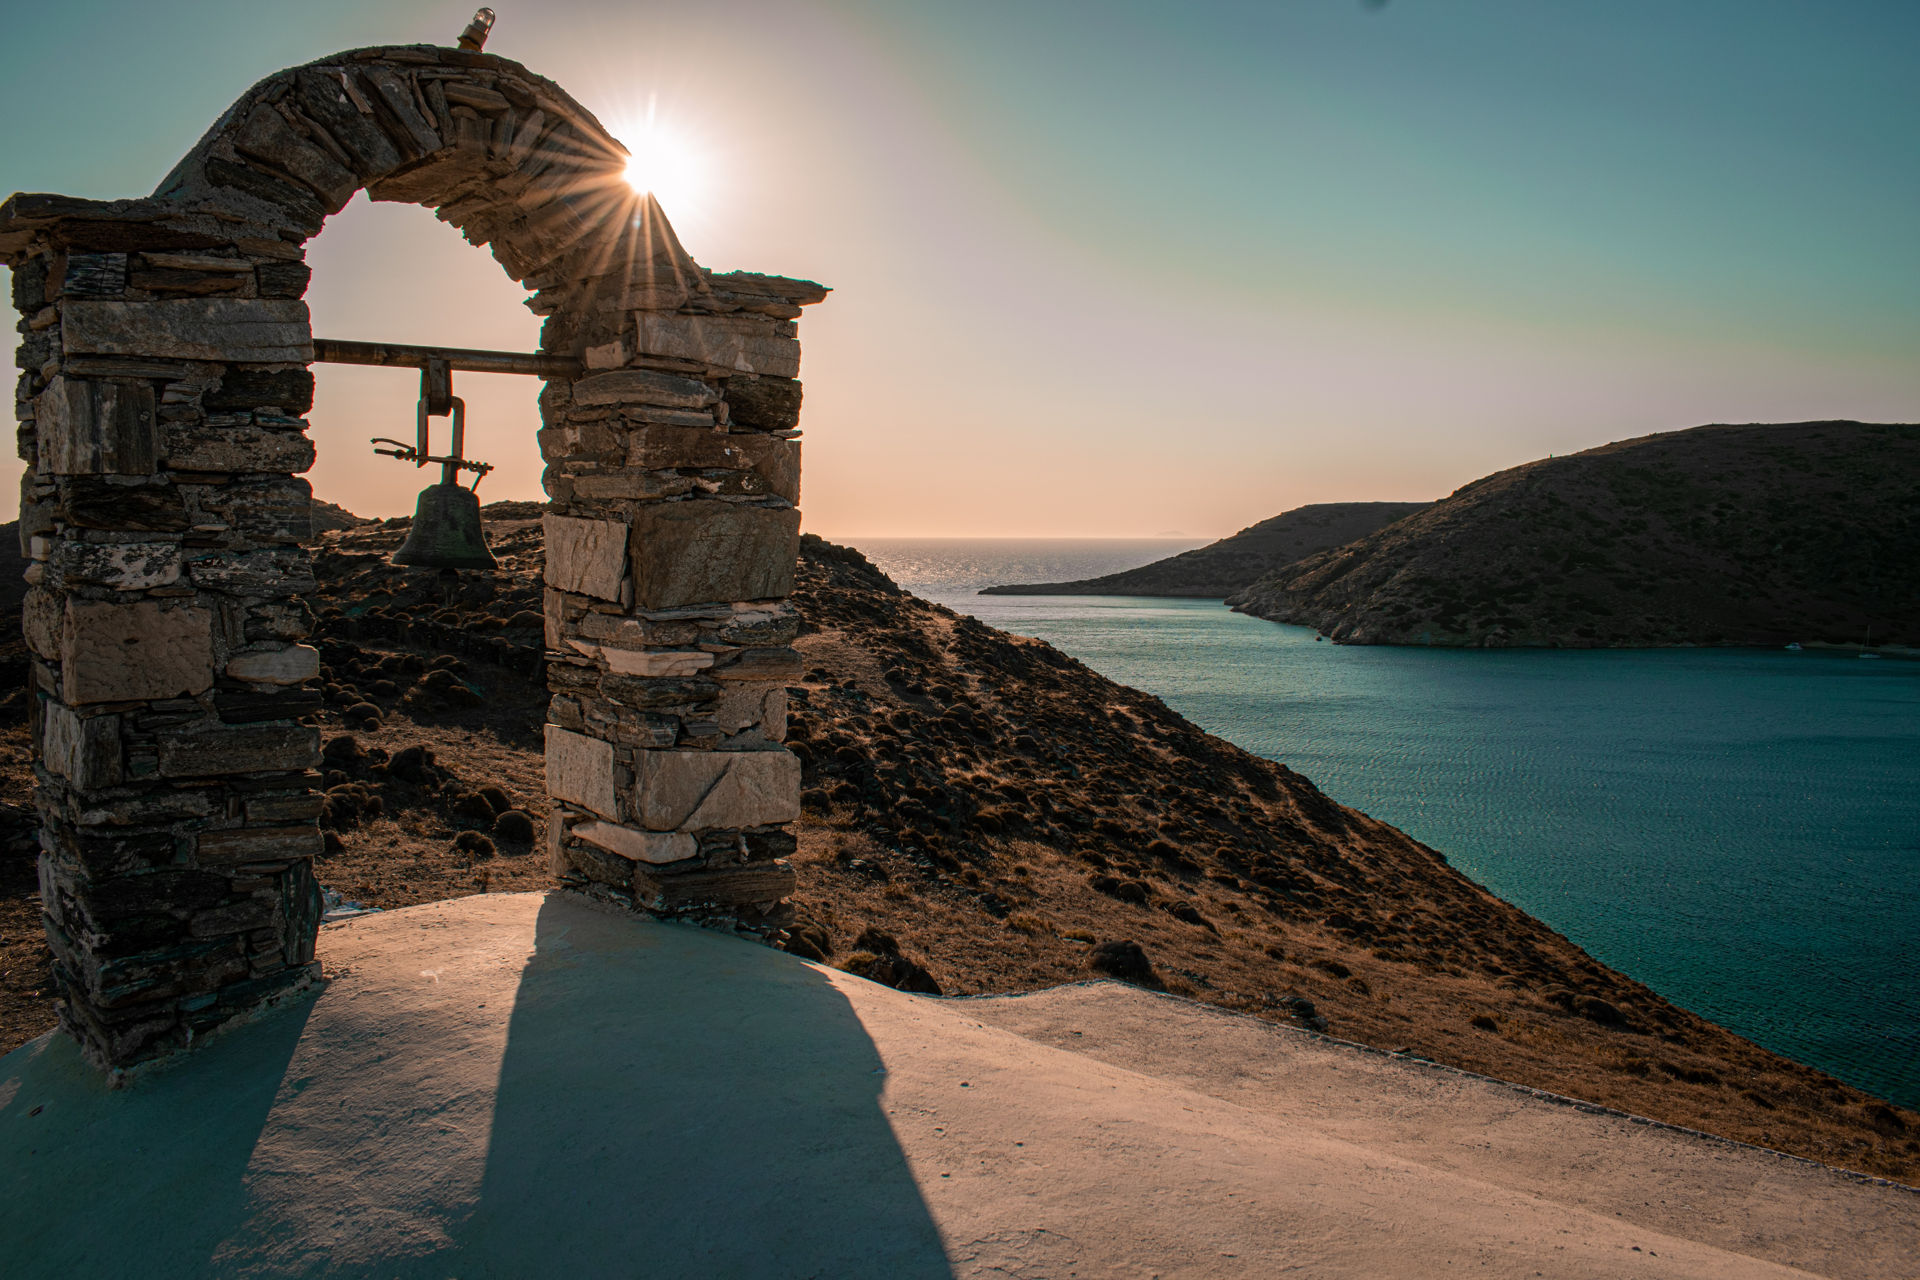 Hiking in Kythnos by Fotis Fotopoulos